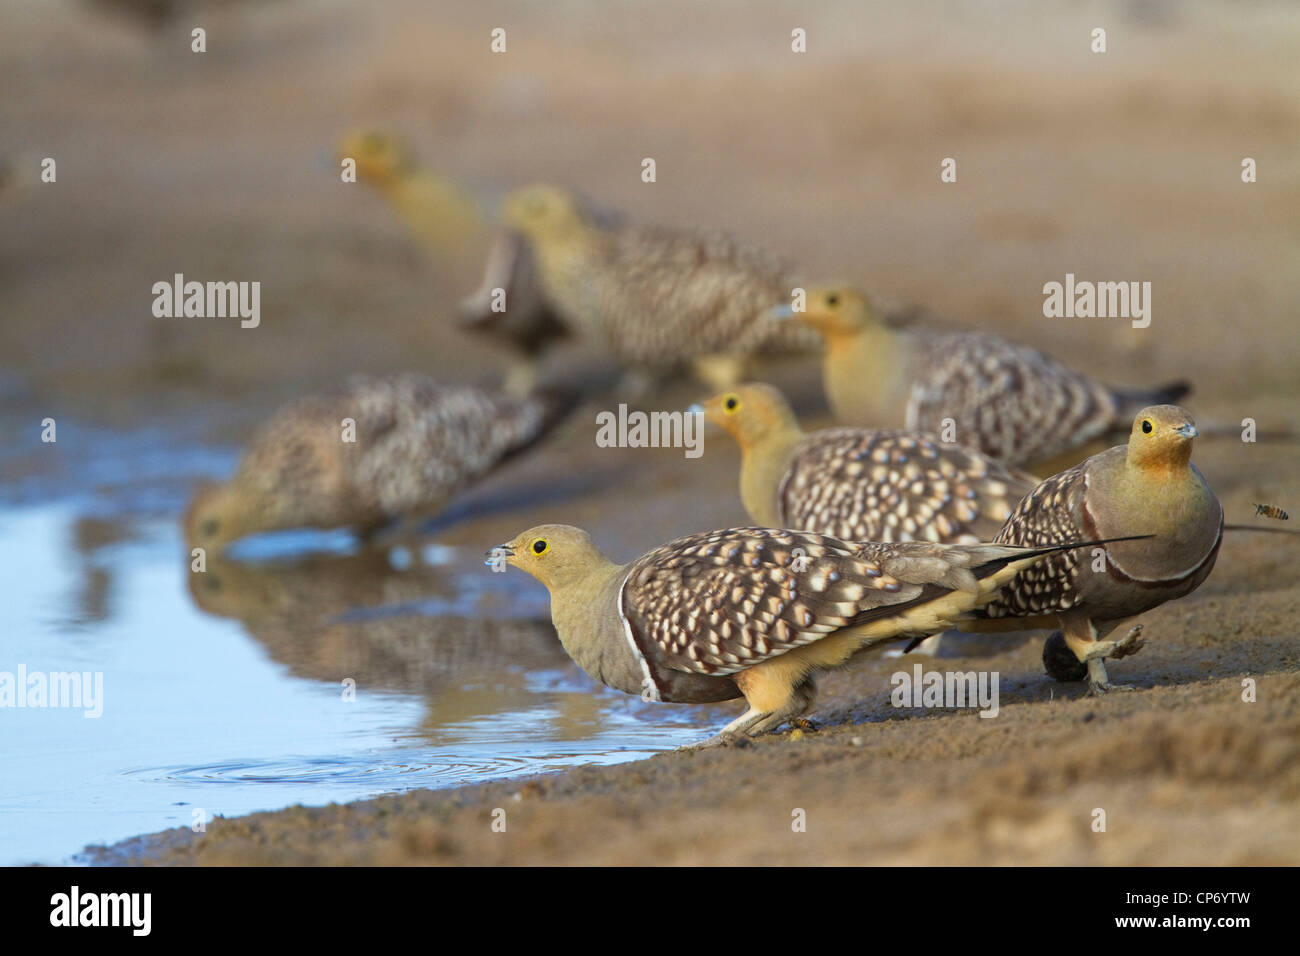 A flock of Namaqua Sandgrouse drinking water from a puddle Stock Photo